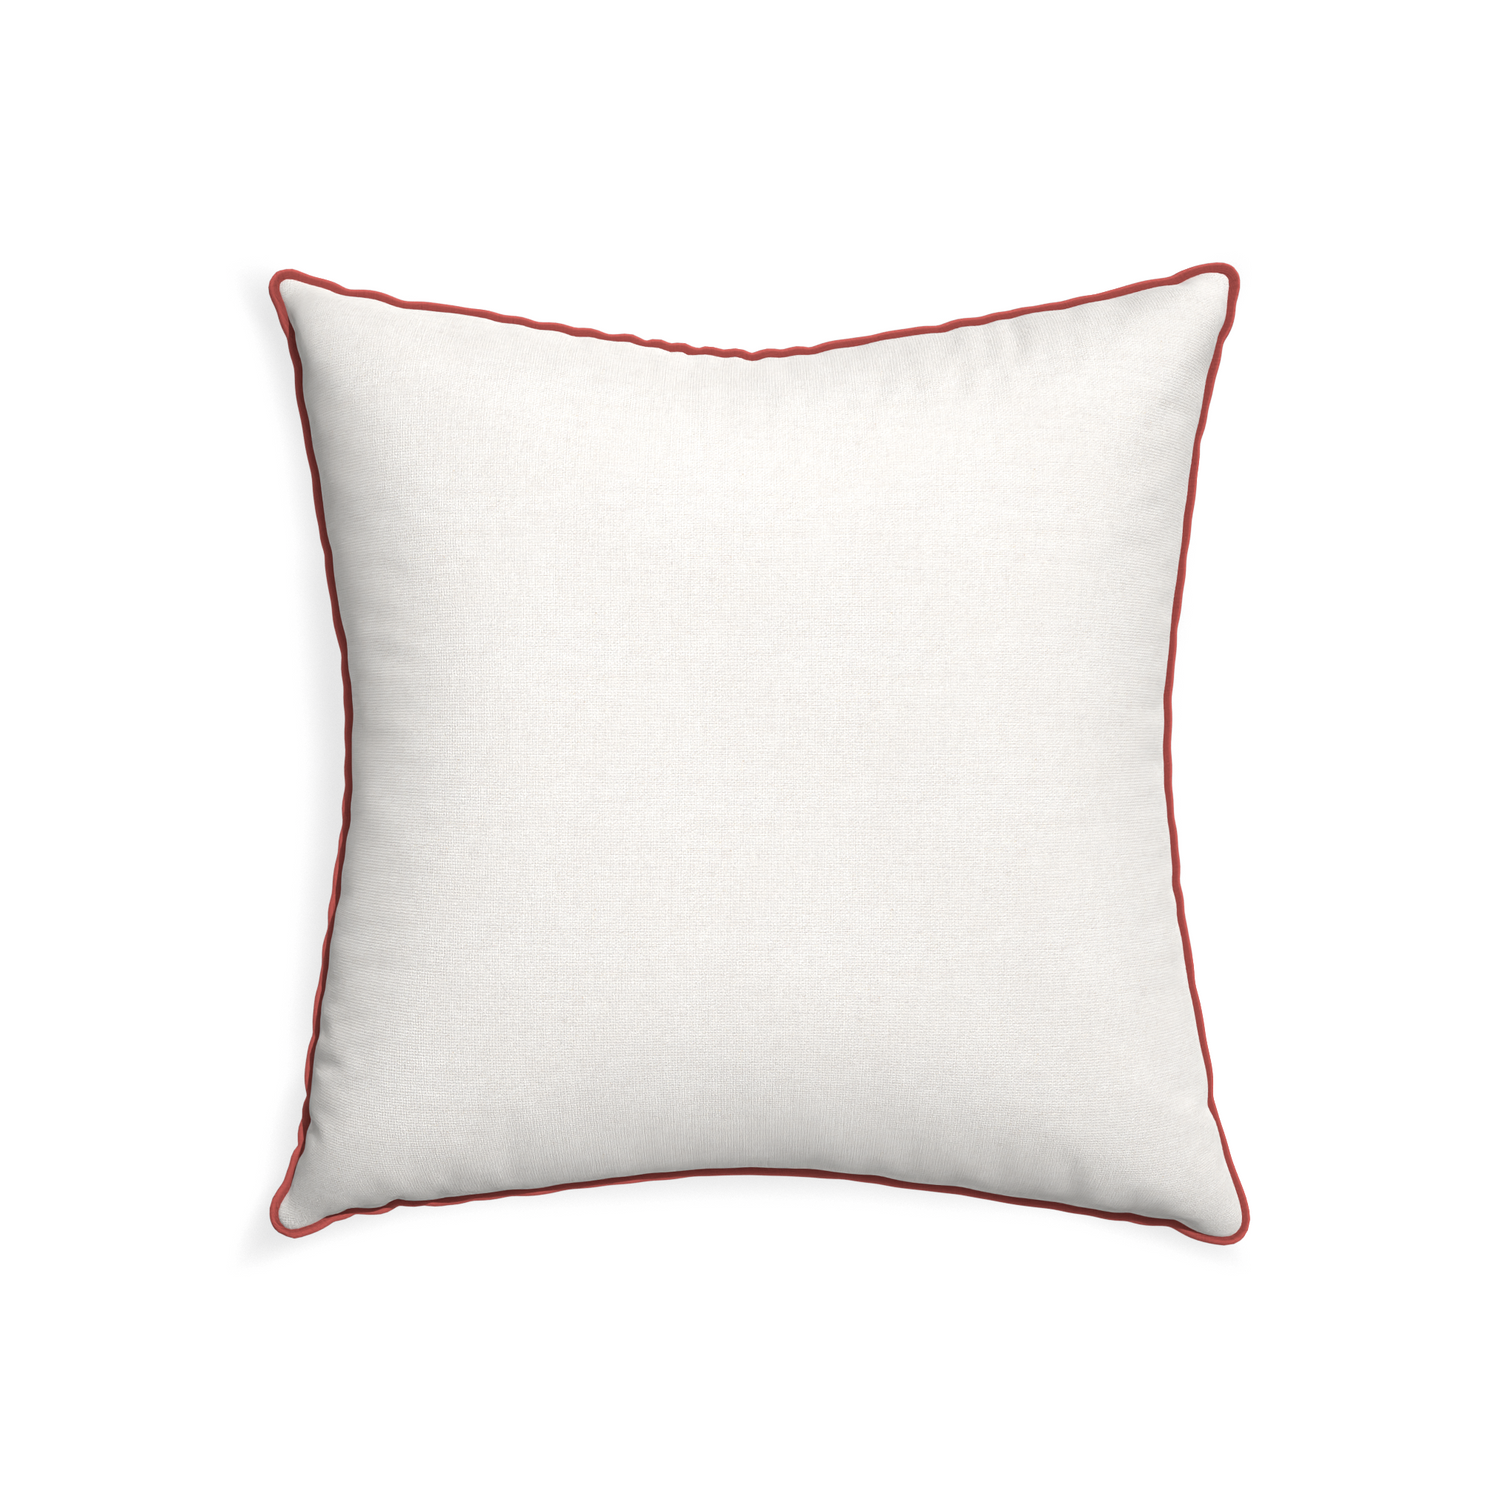 22-square flour custom pillow with c piping on white background